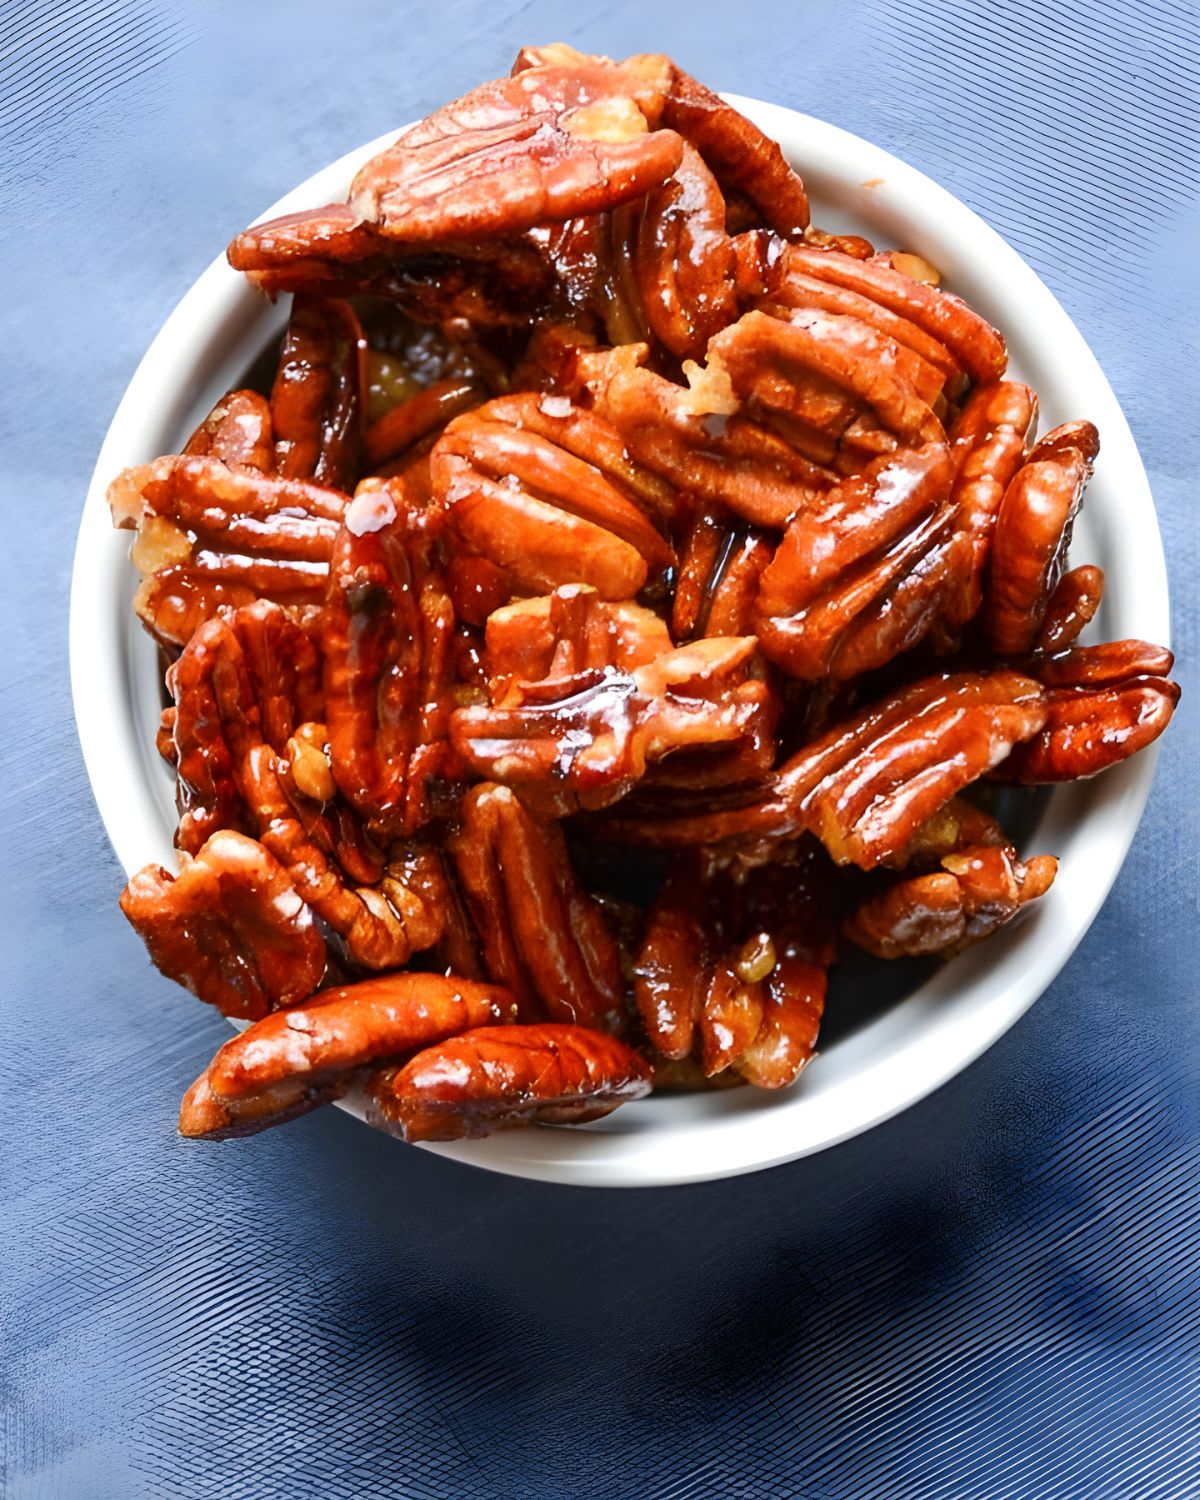 A bowl of glazed spiced pecans.